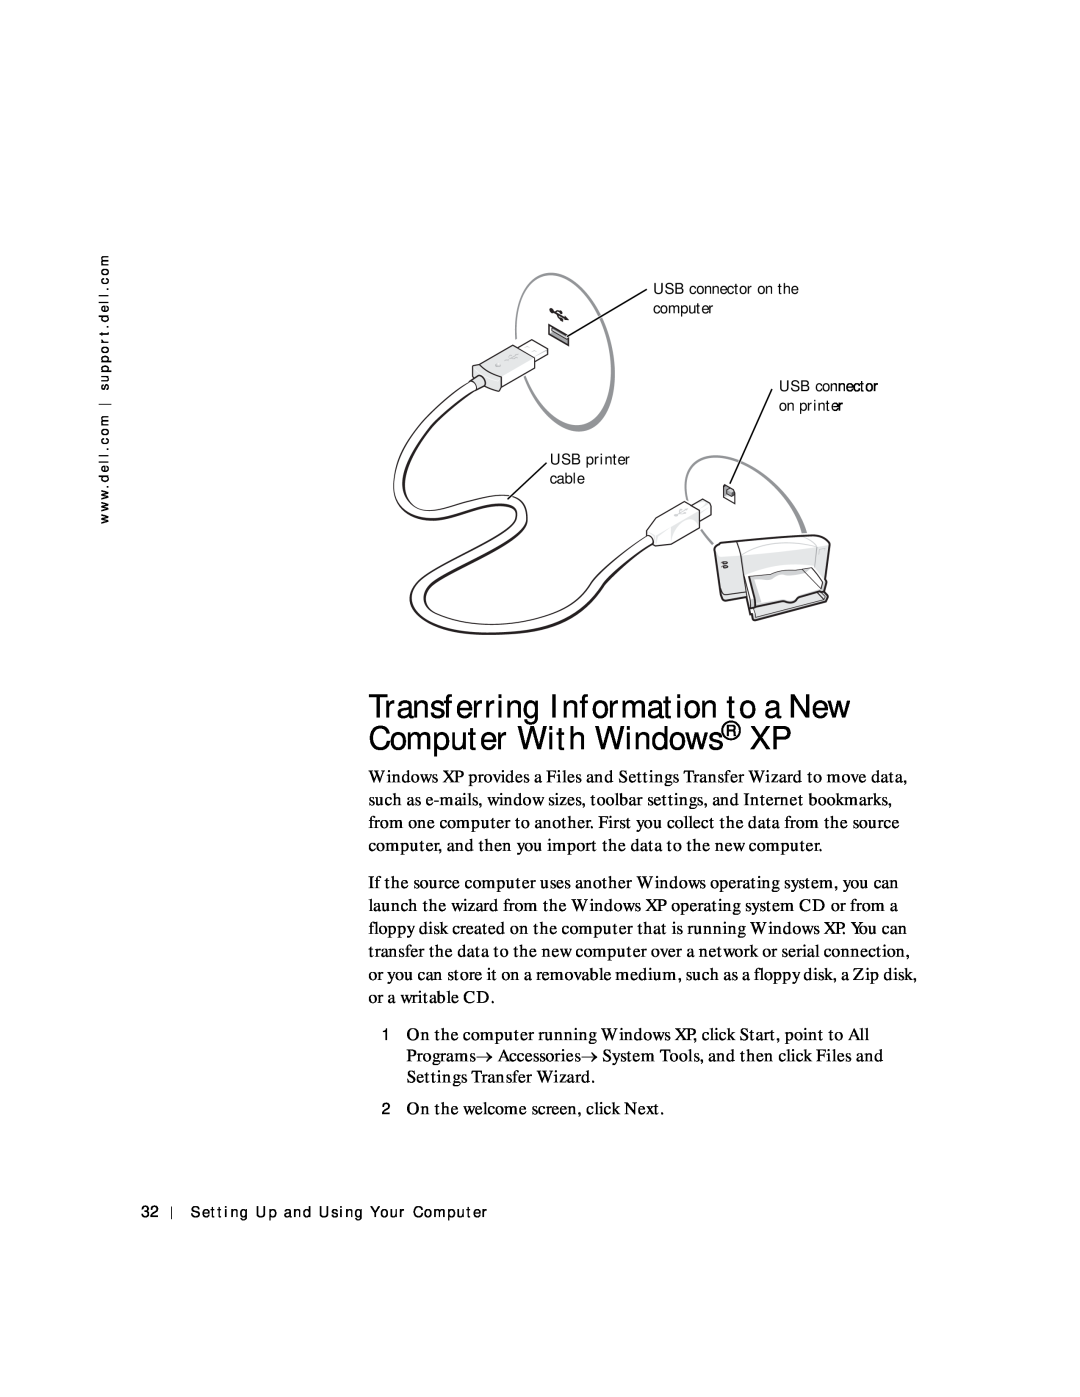 Dell 4150 owner manual Transferring Information to a New Computer With Windows XP 